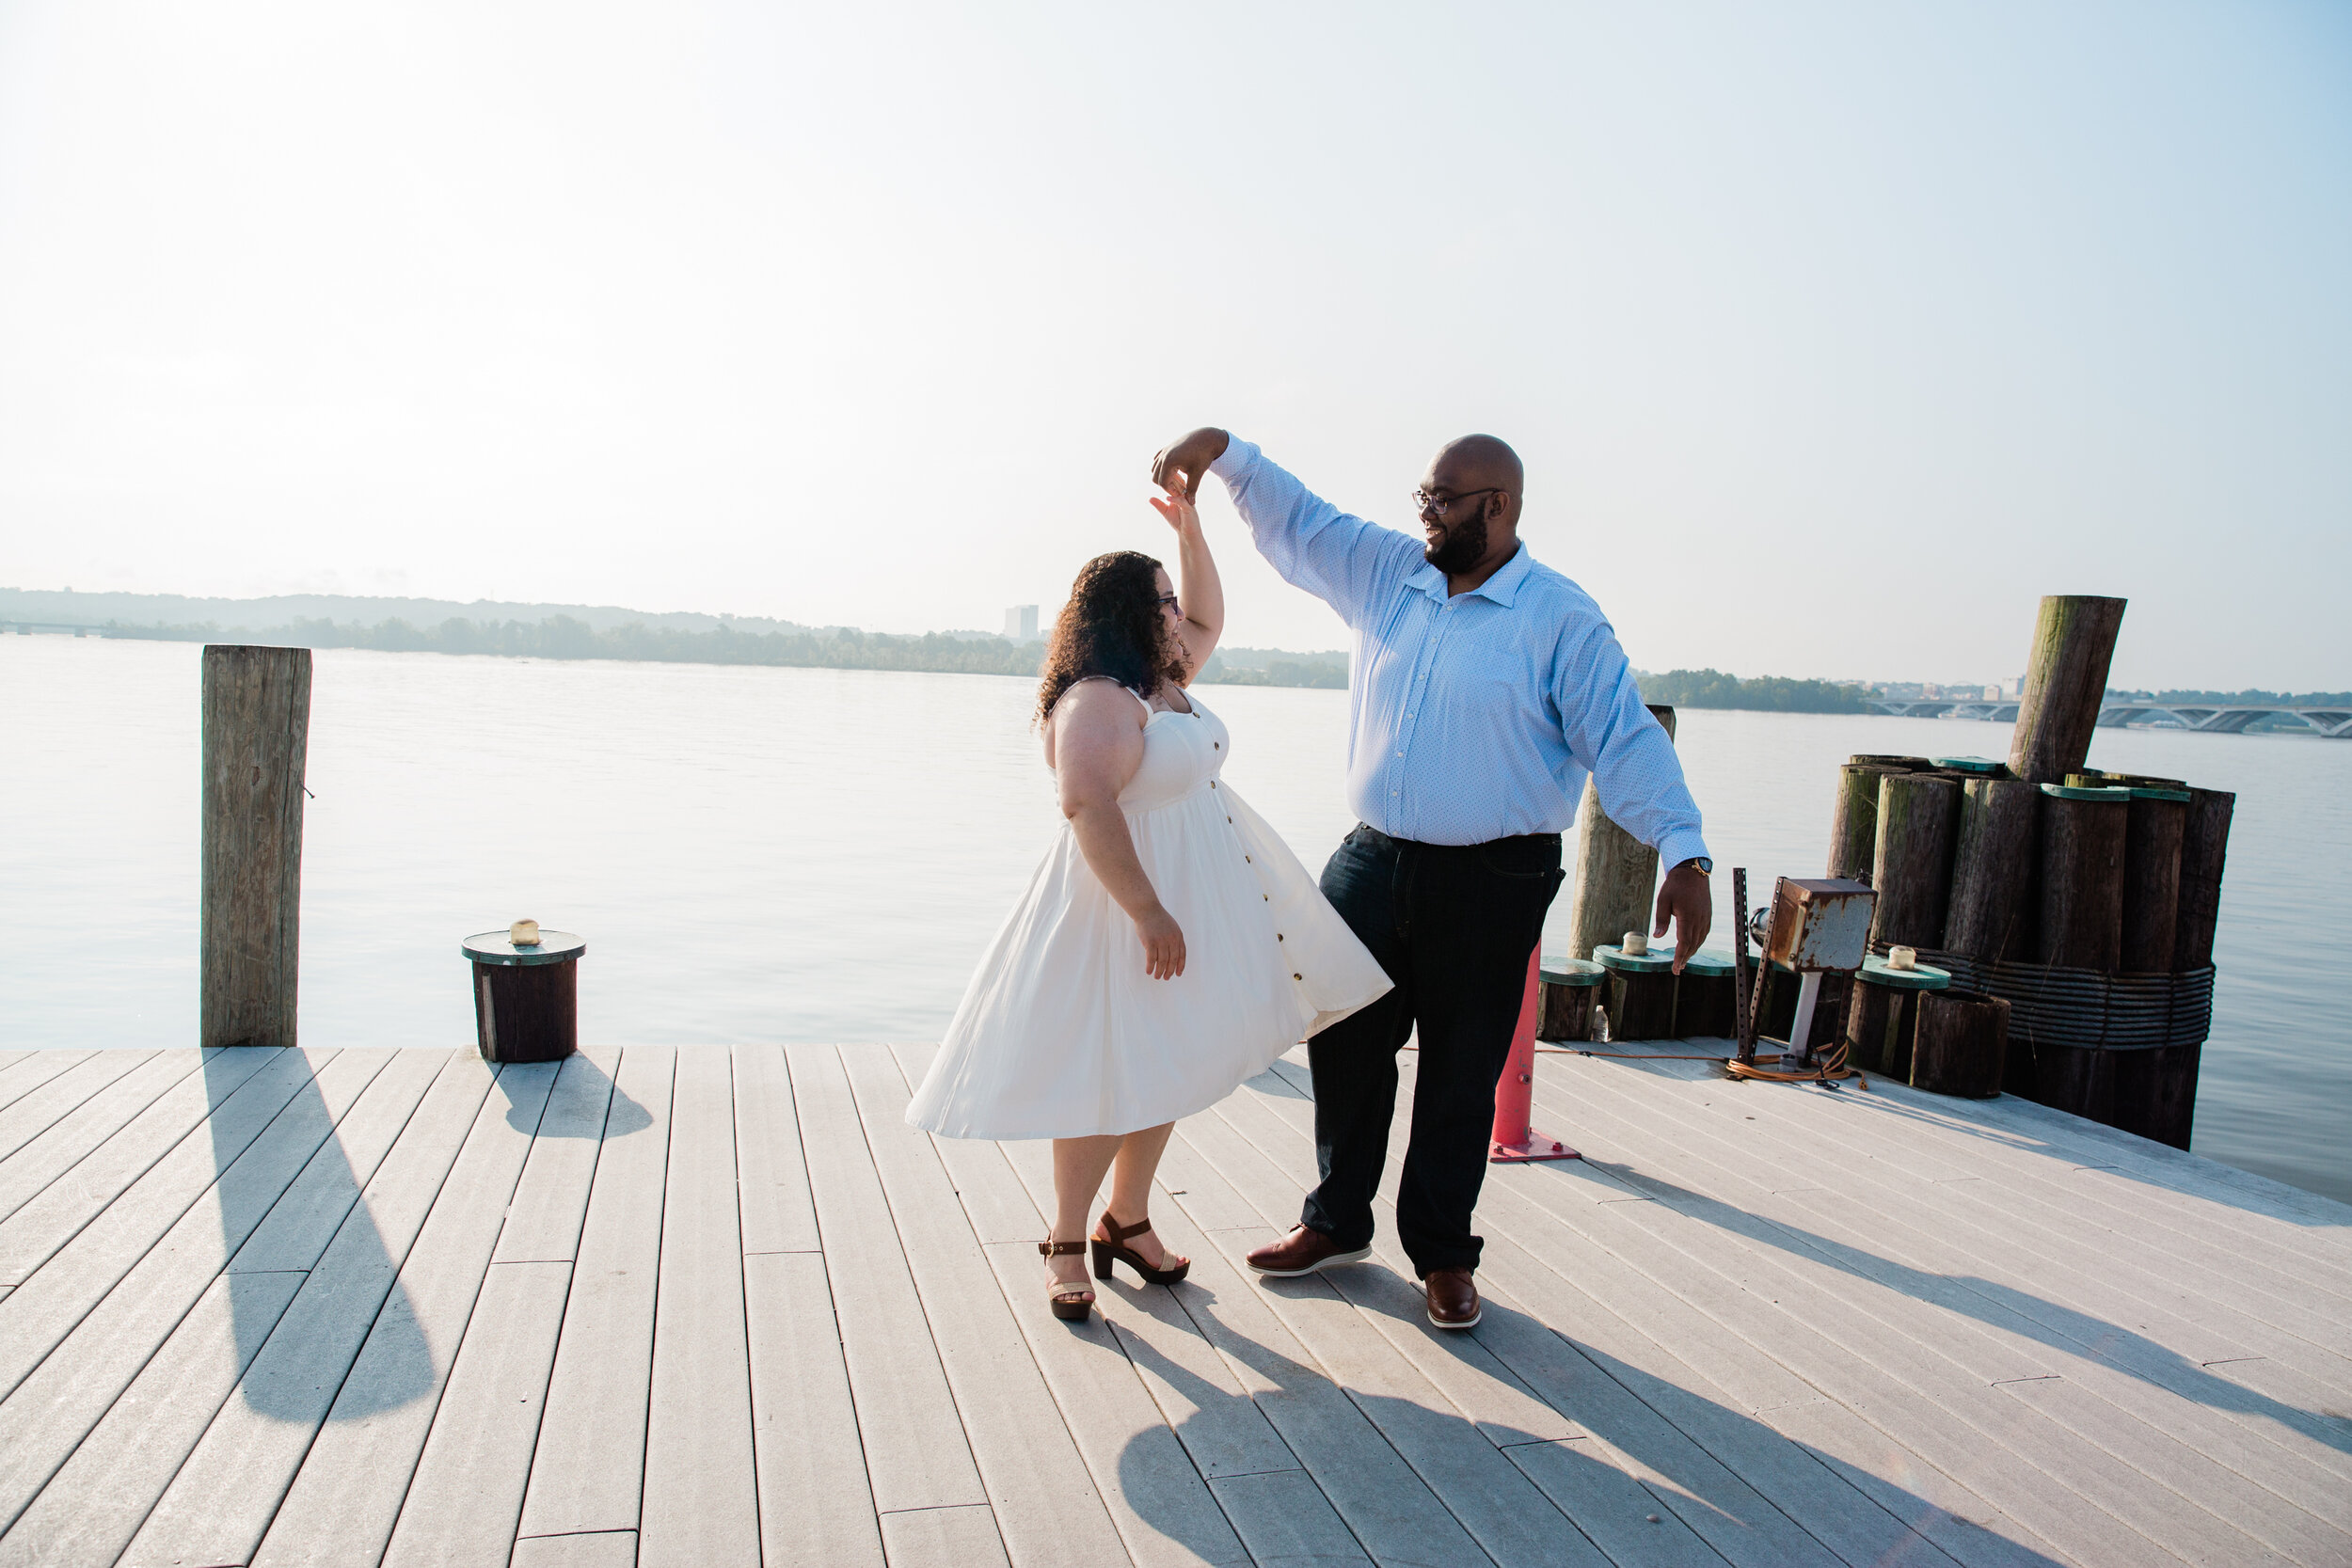 Engagement Session in Old Town Alexandria North Virginia by black wedding photographers Megapixels Media-4.jpg